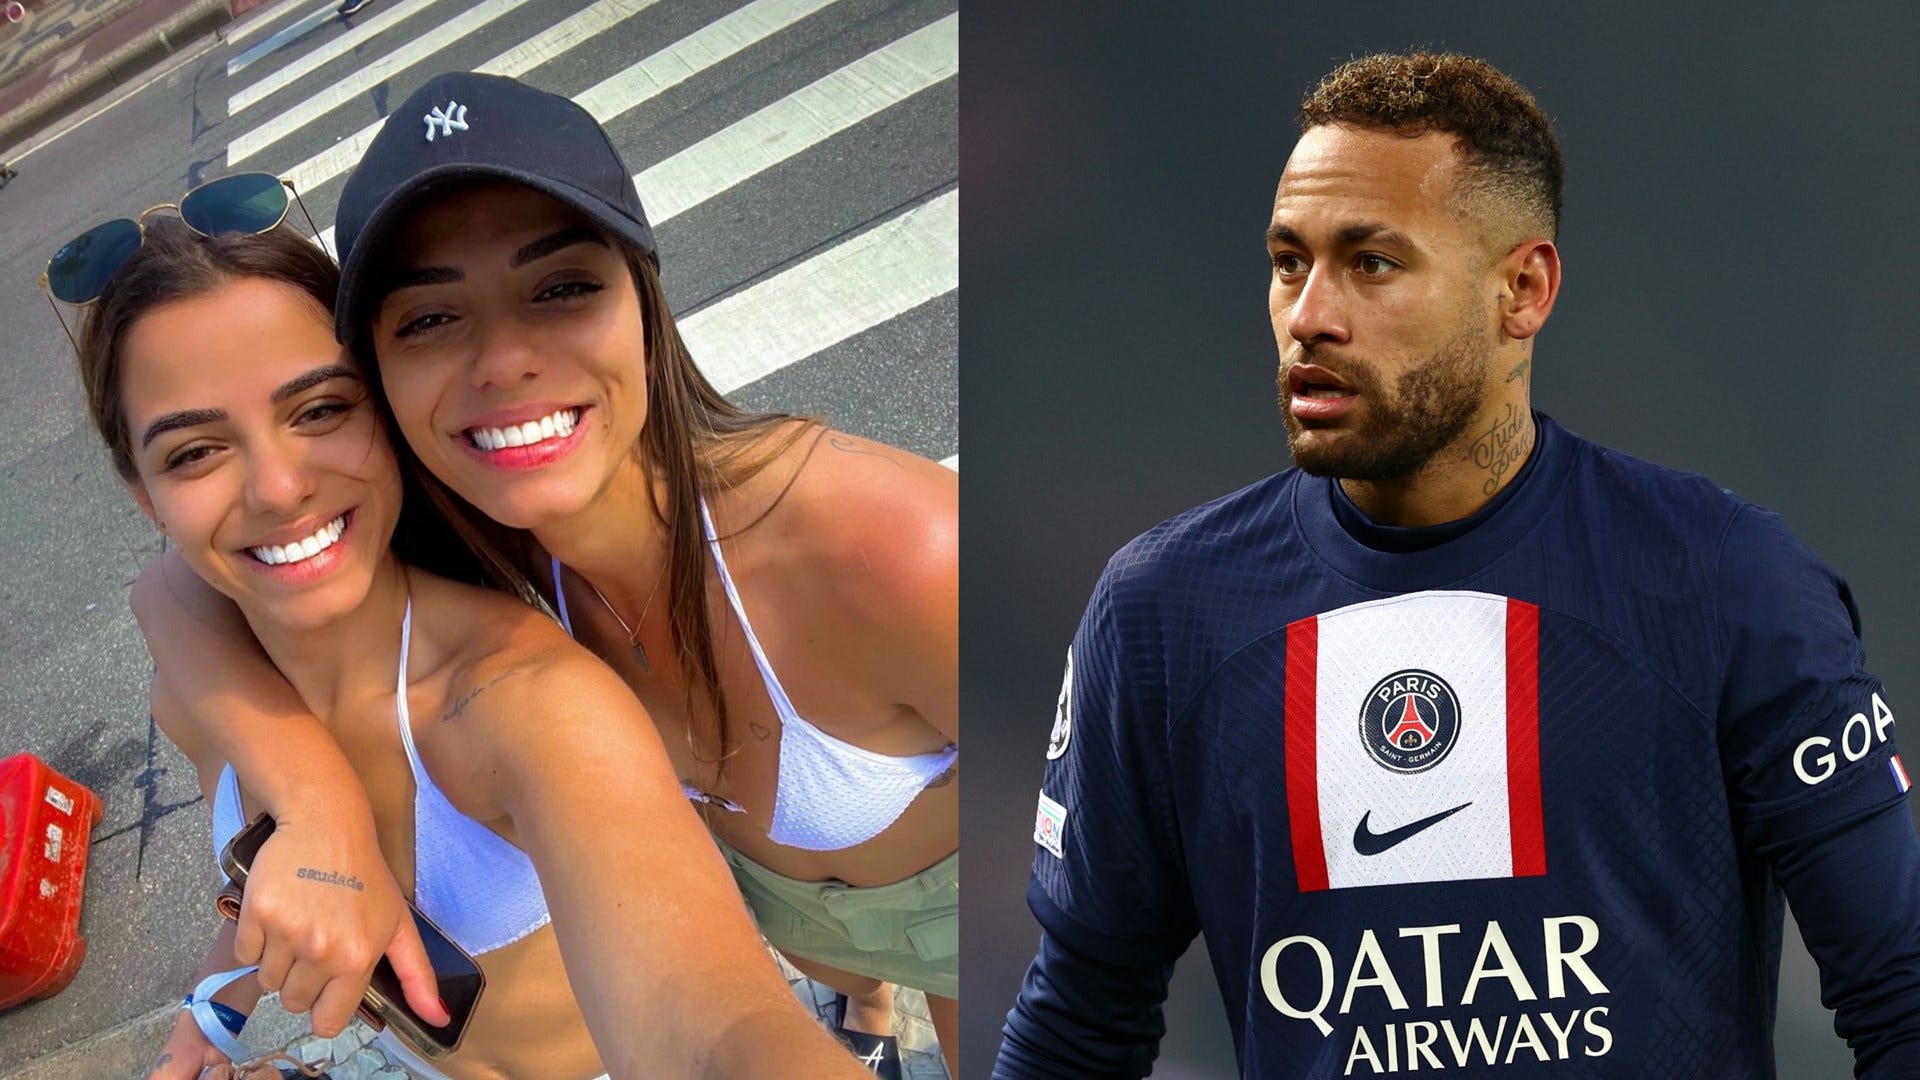 Neymar asked for sex with both of pic image